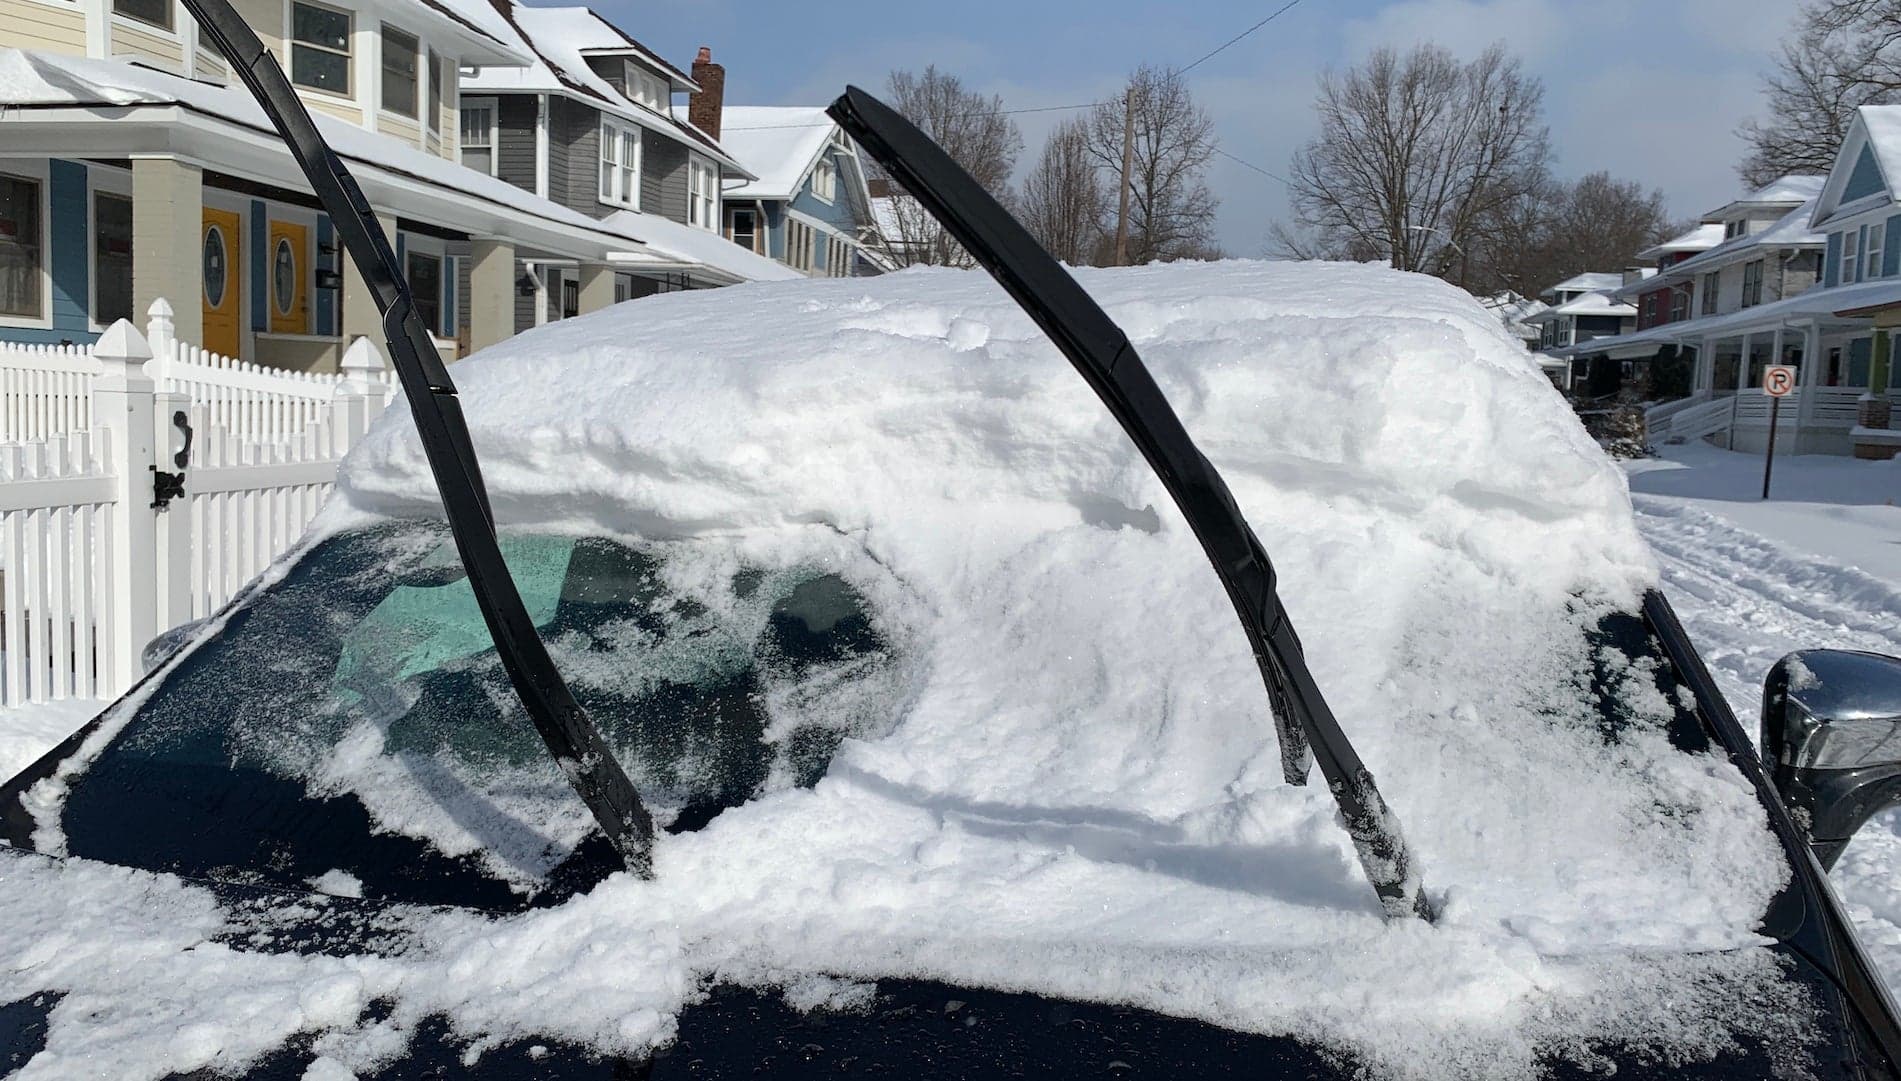 Counterpoint: Leave Your Damn Wipers Up When It’s Snowing